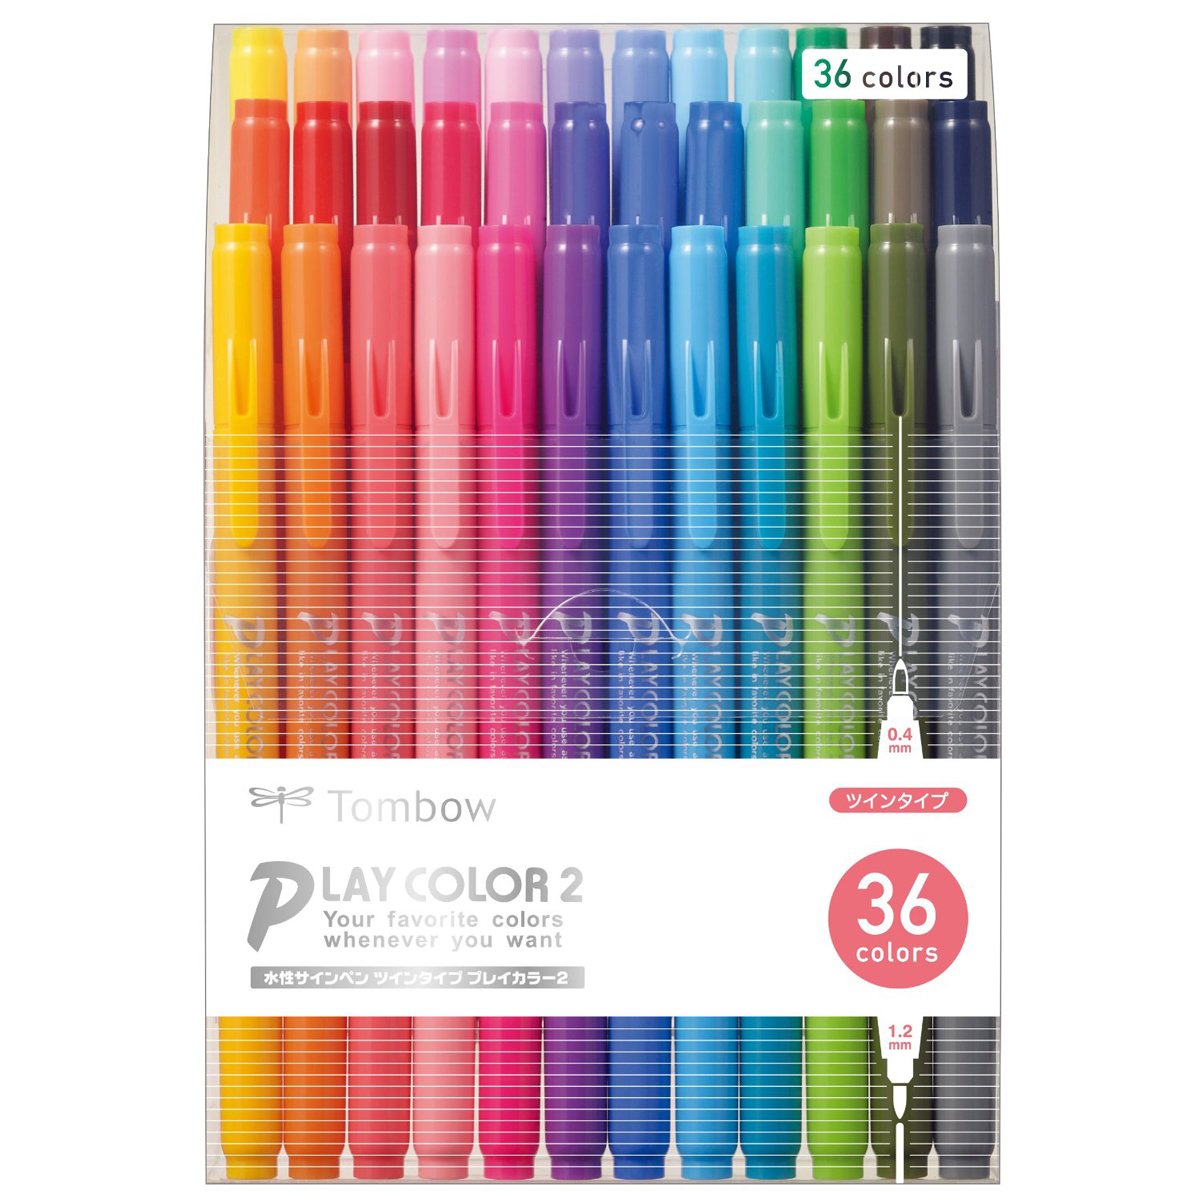 Tombow Play Color 2 Double-Sided Marker - 36 Color Set